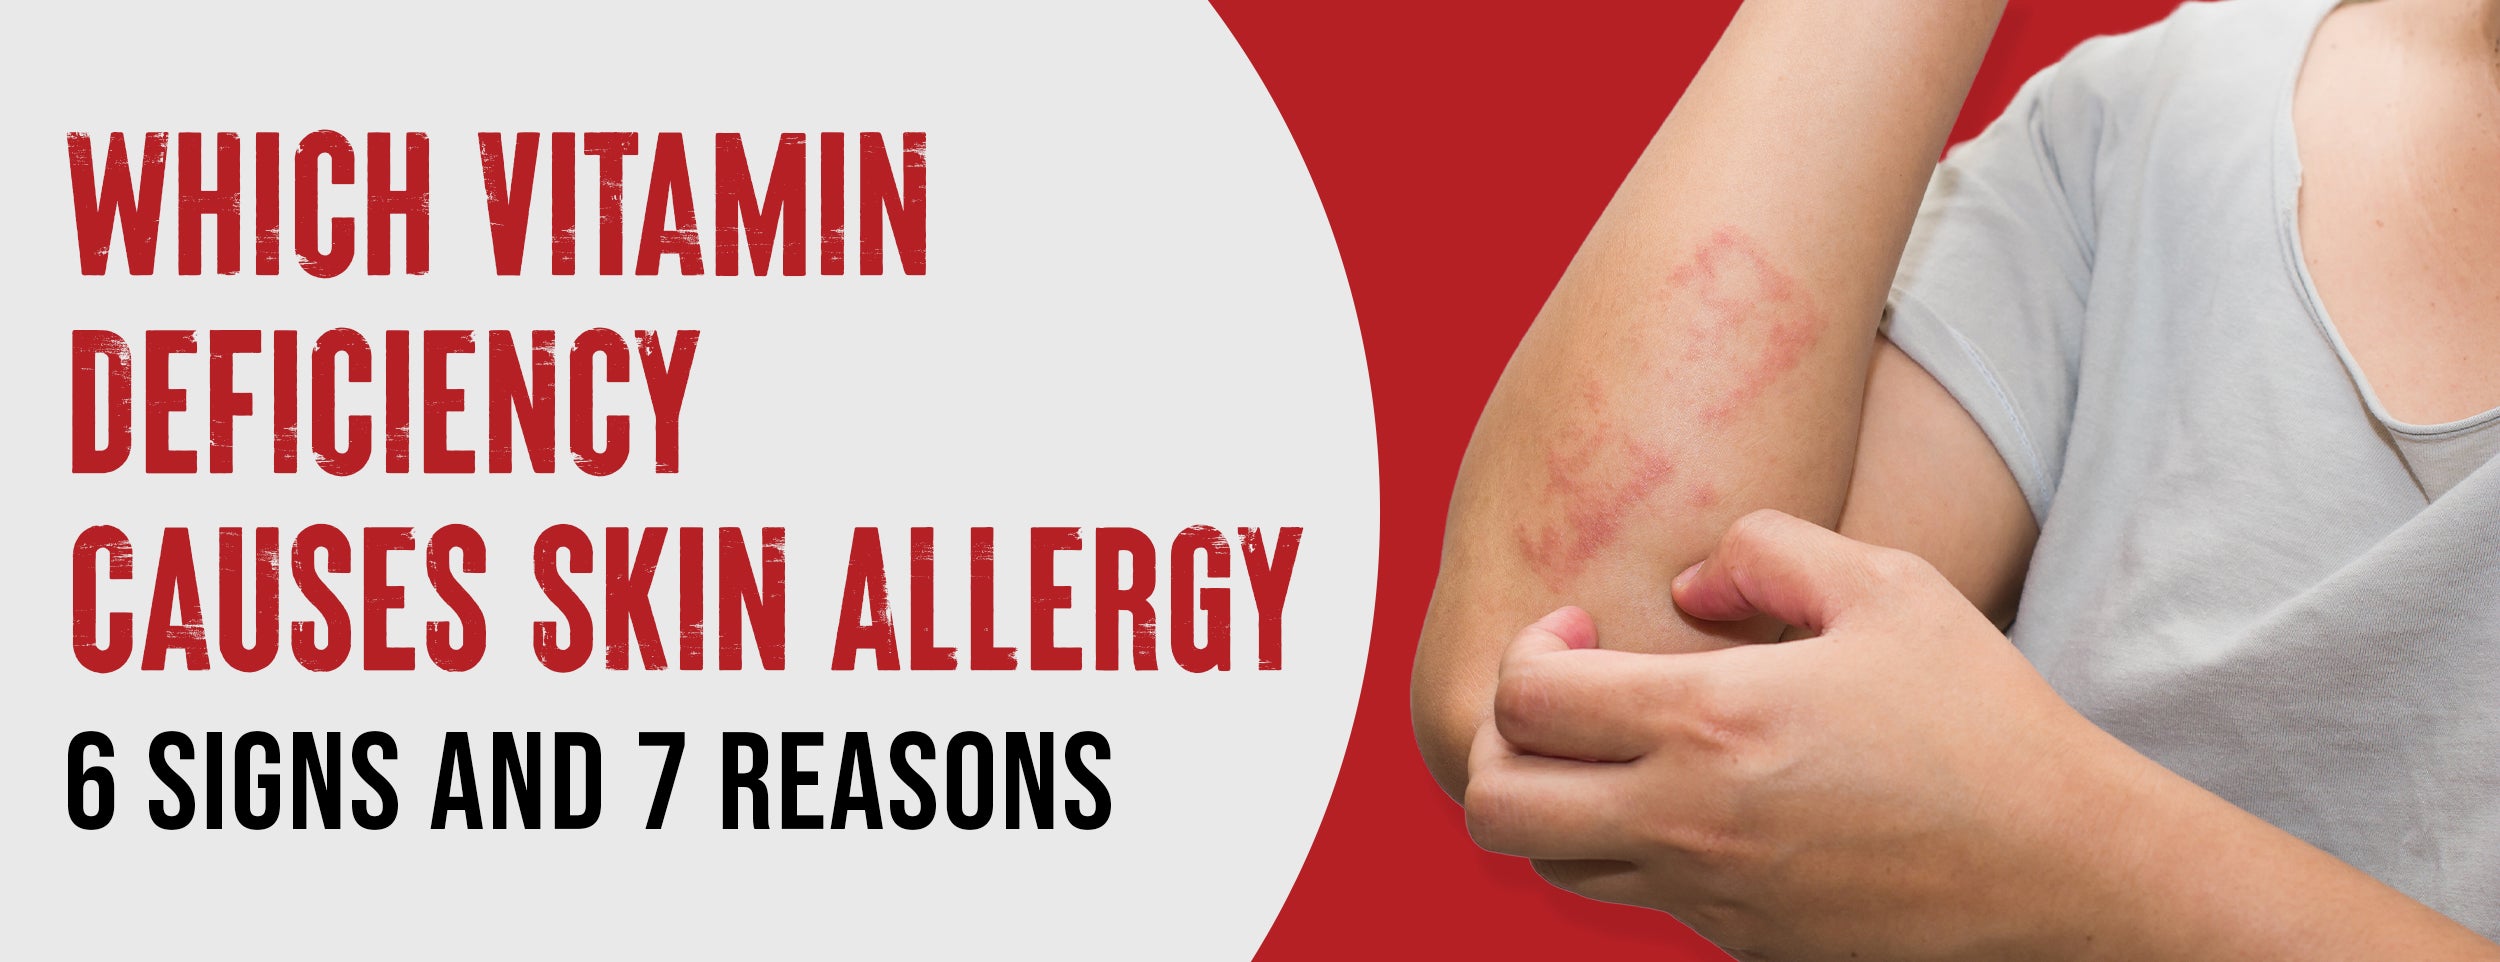 Identifying and preventing skin allergies caused by vitamin deficiency